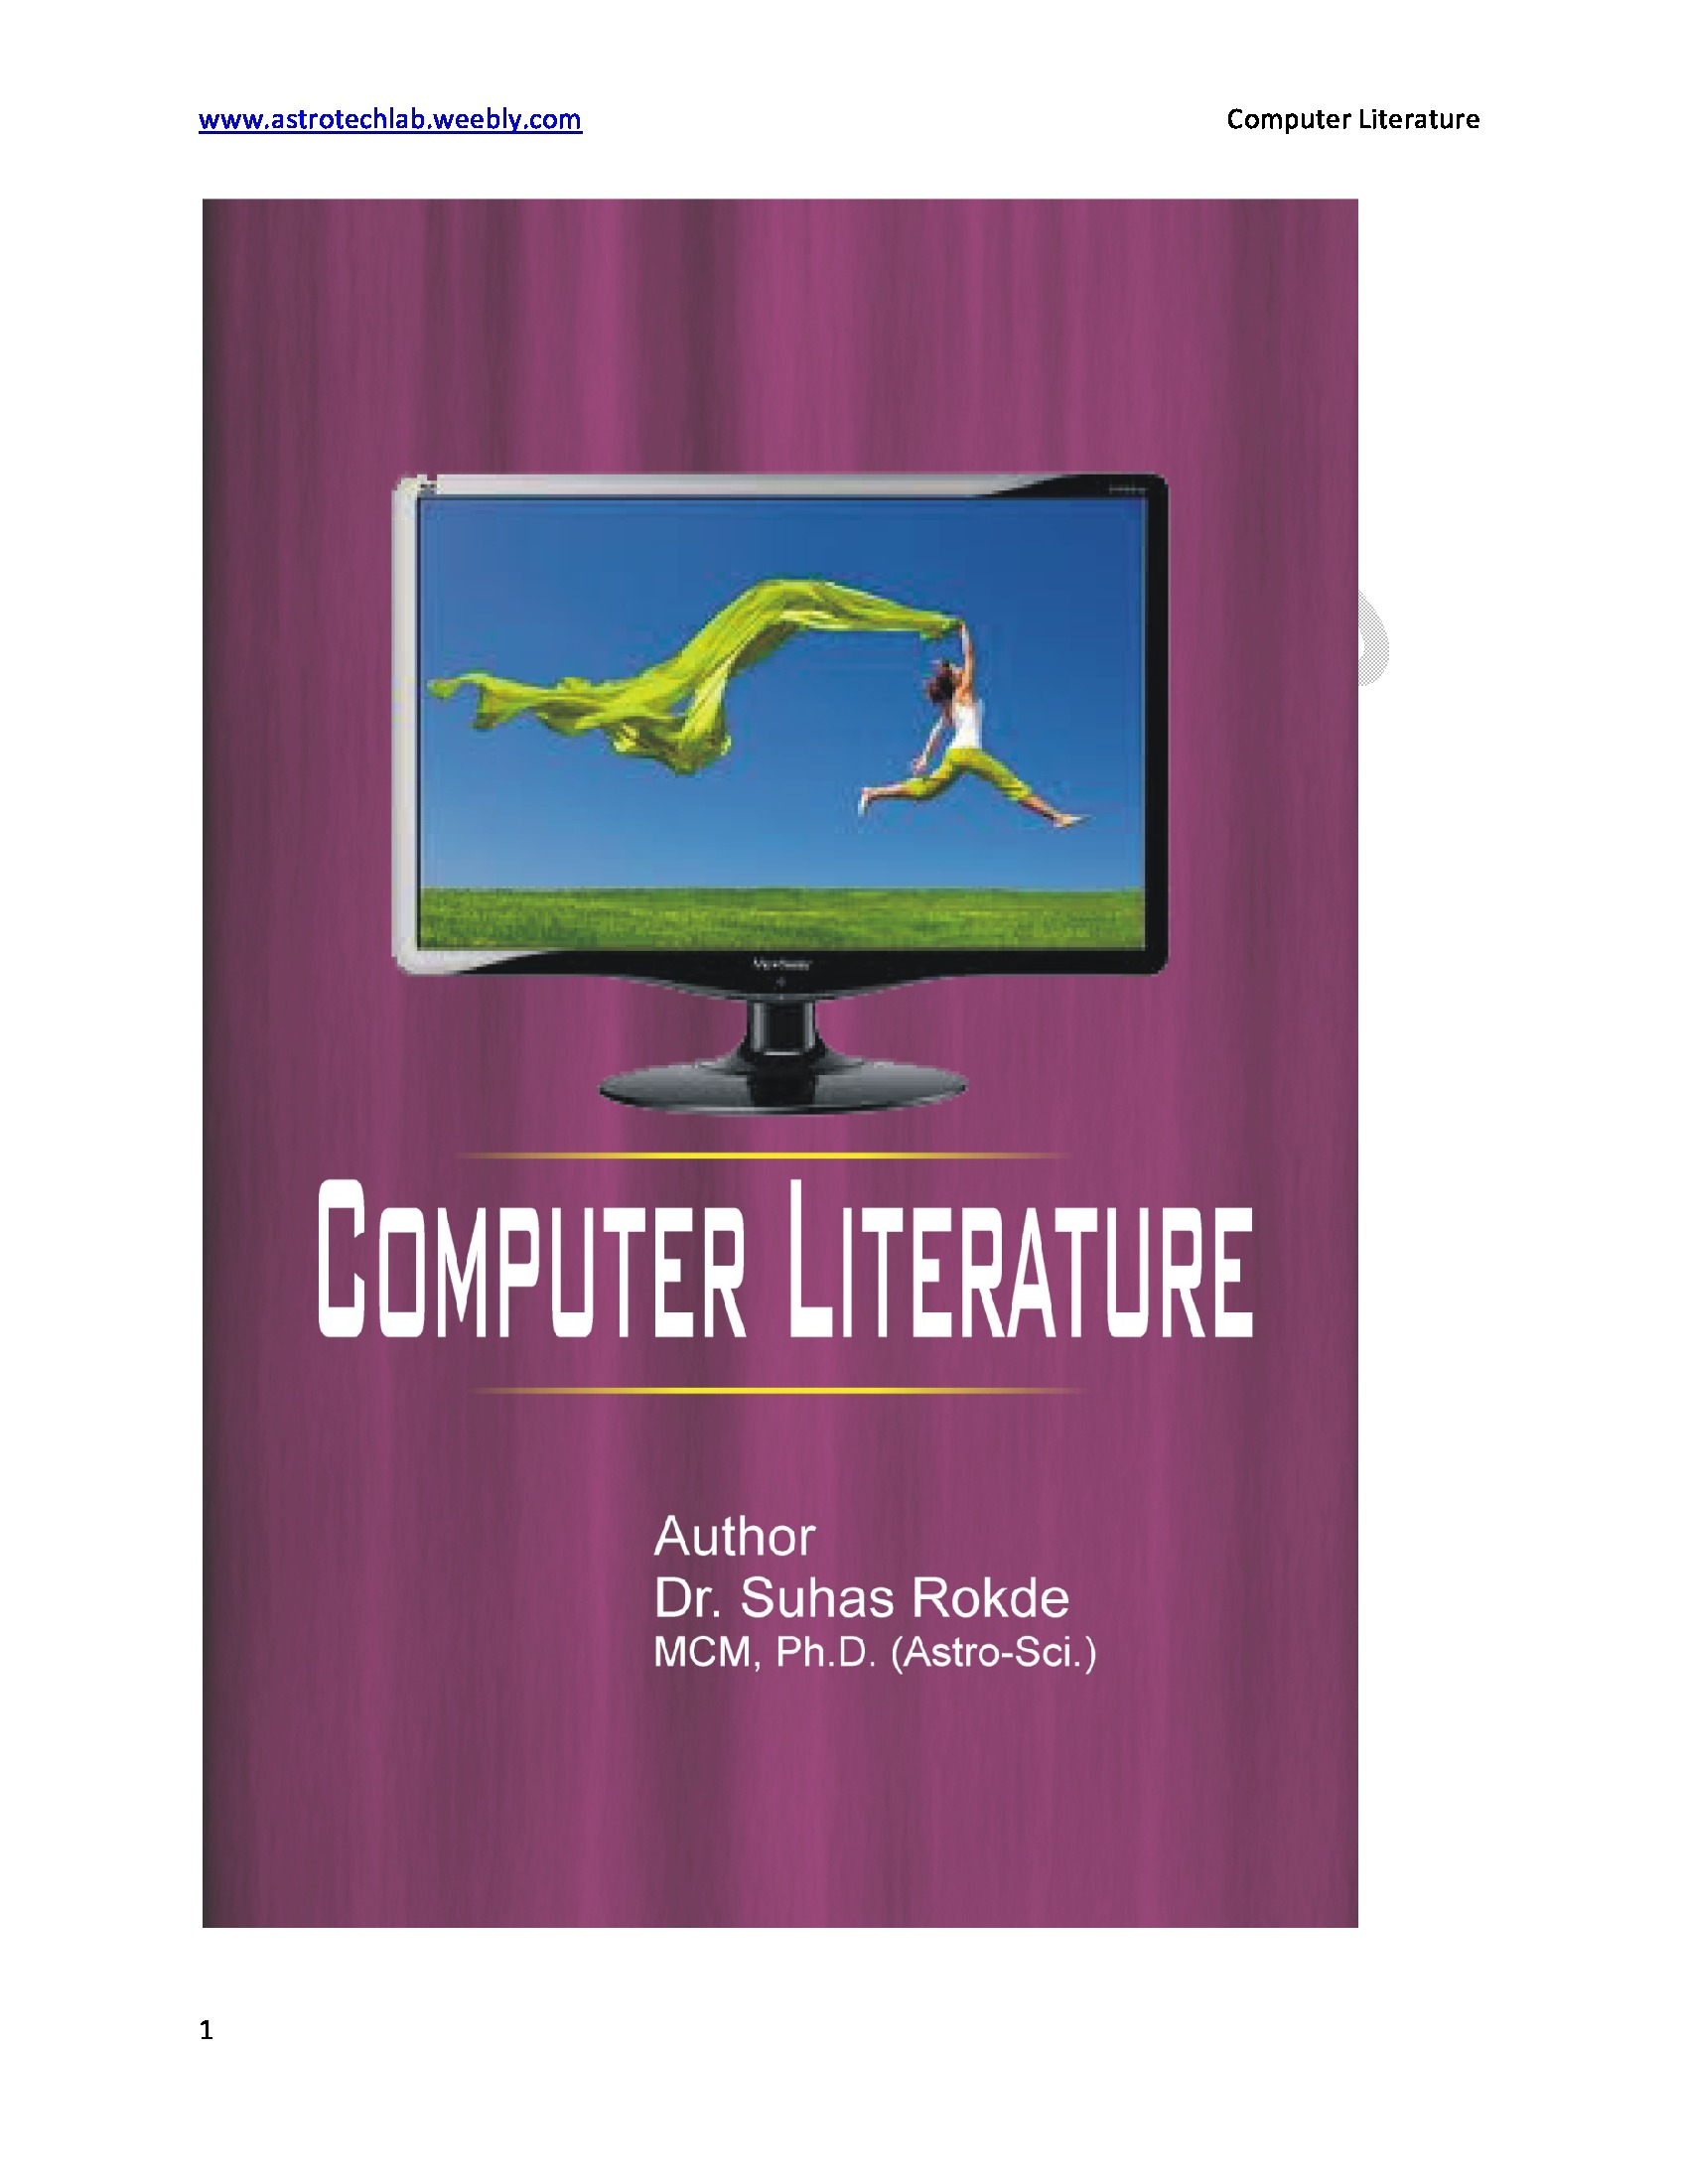 literature review on computer vision